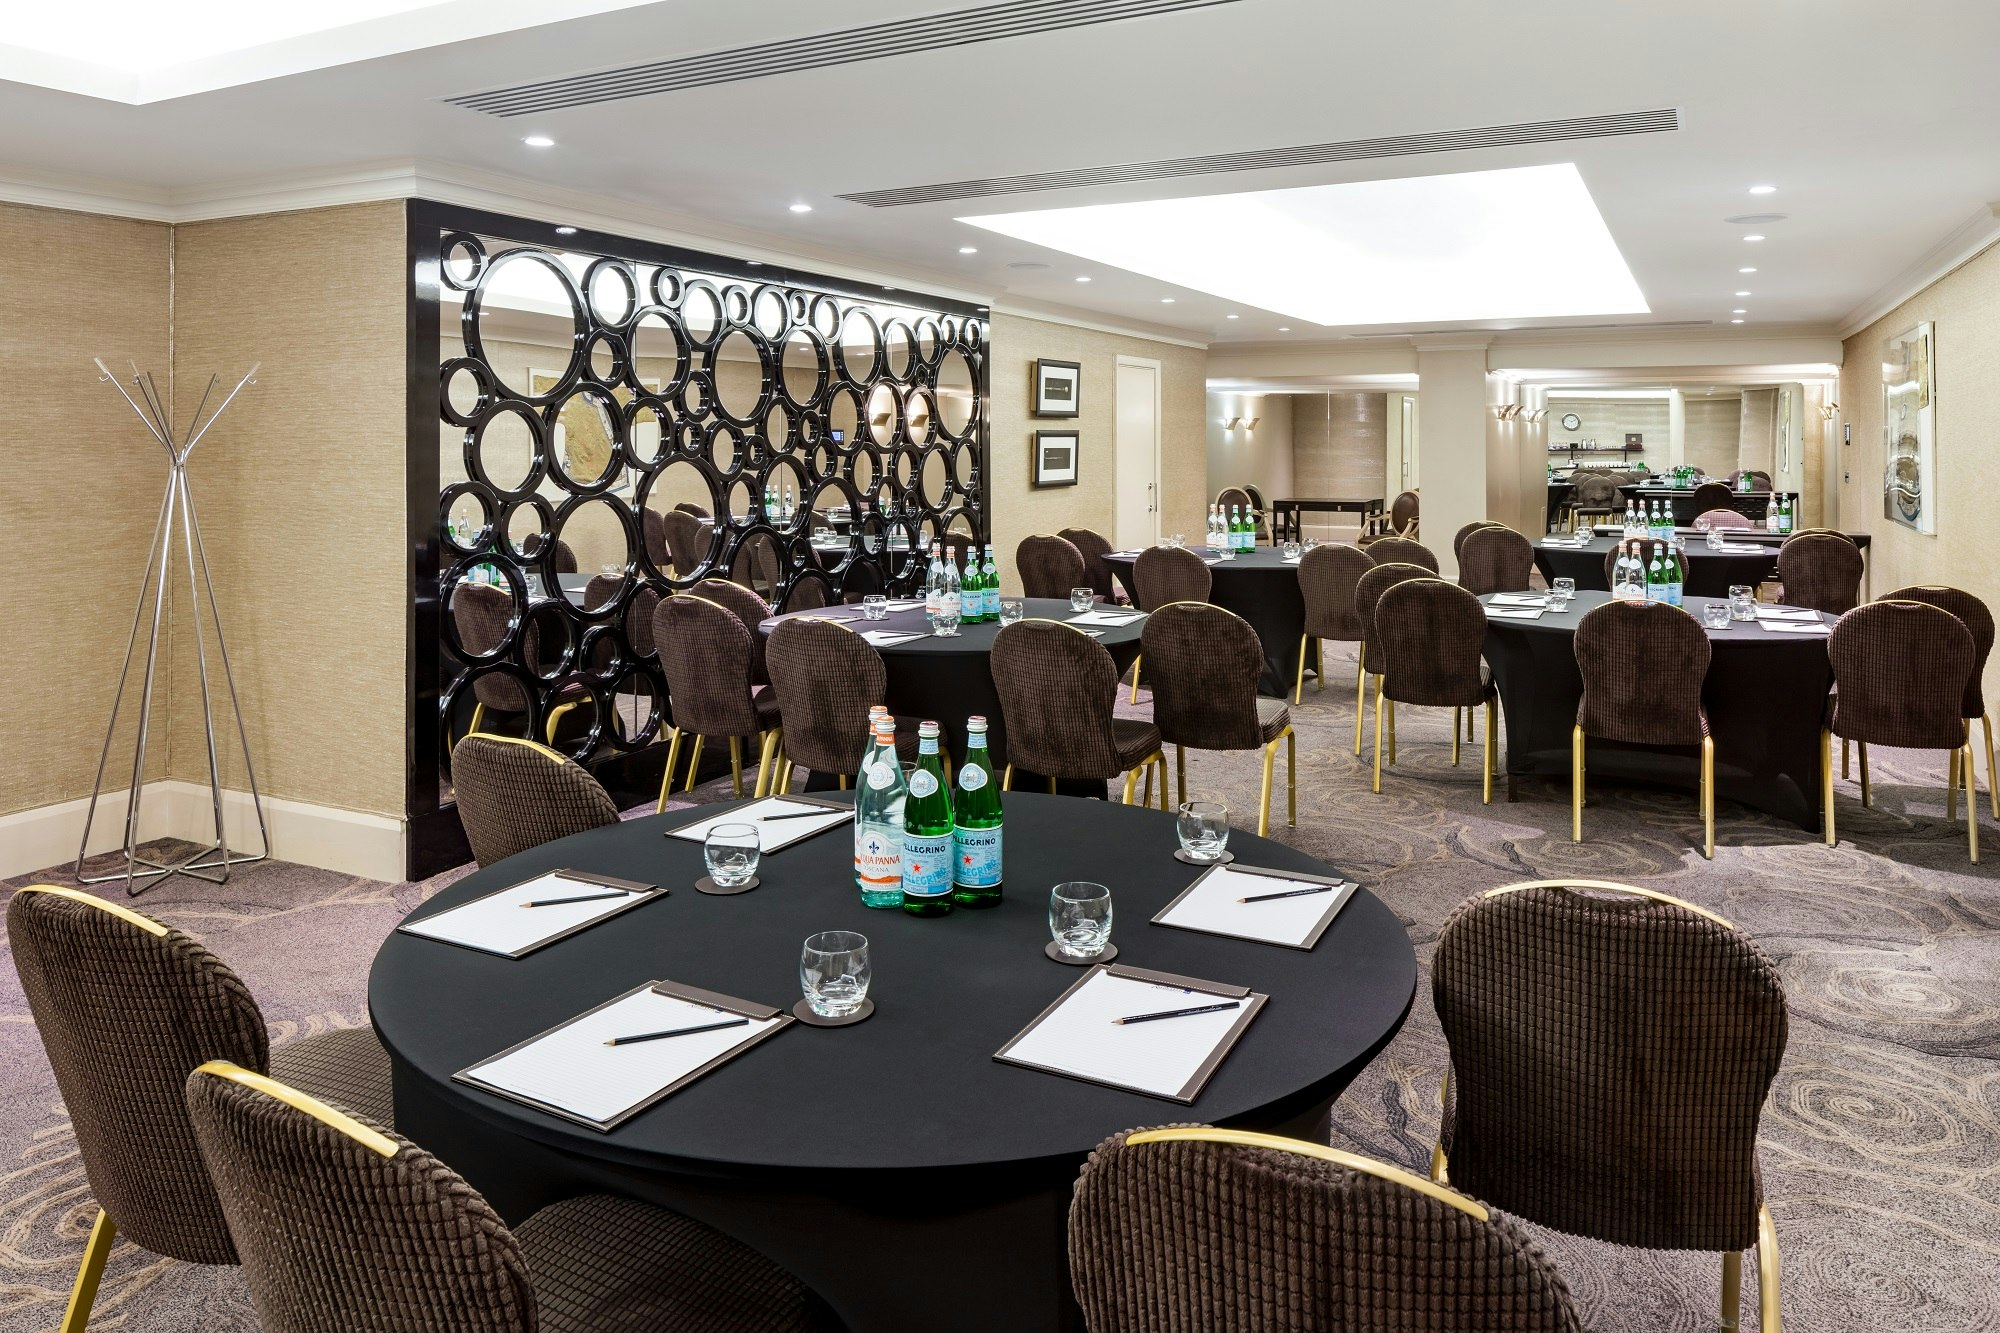 Restaurants With Private Rooms Venues in London - Radisson Blu Edwardian Grafton 